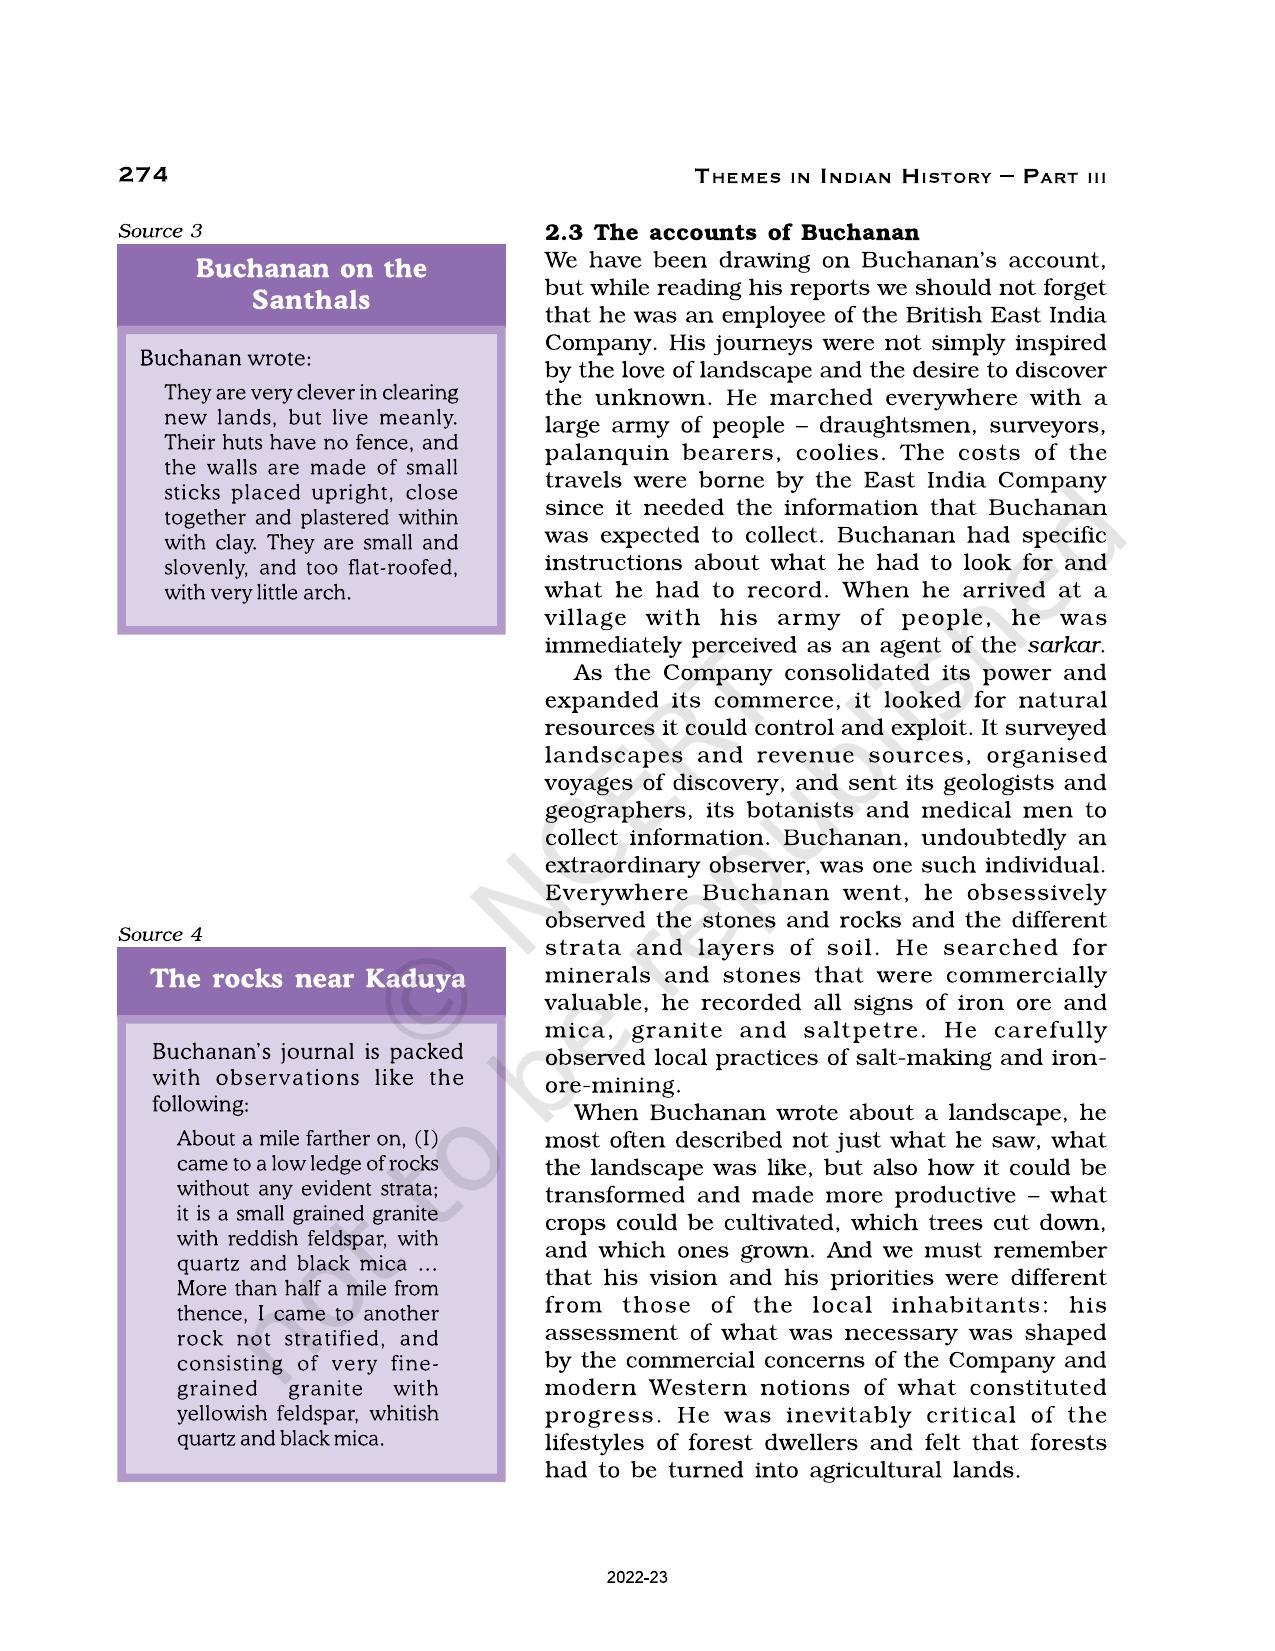 NCERT Book for Class 12 History (Part-II) Chapter 10 Colonialism and the Countryside - Page 18